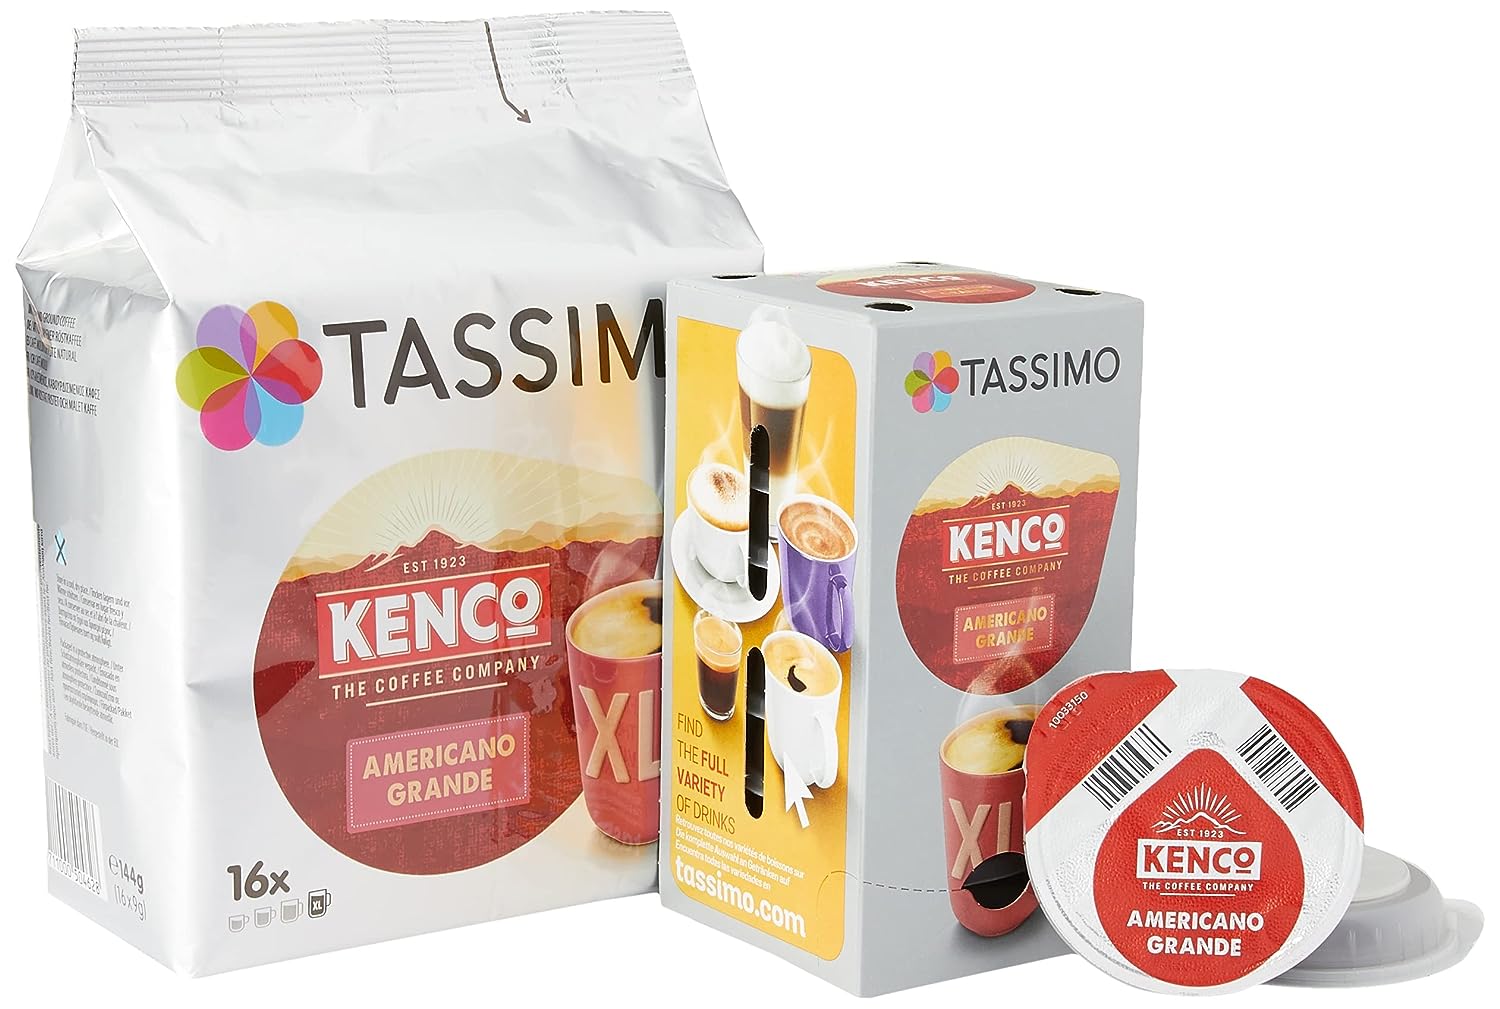 Kenco Classic Blend Coffee, T-Discs for Tassimo Coffeemakers, 16-Count Packages (Pack of 2) [Amazon Frustration-Free Packaging]